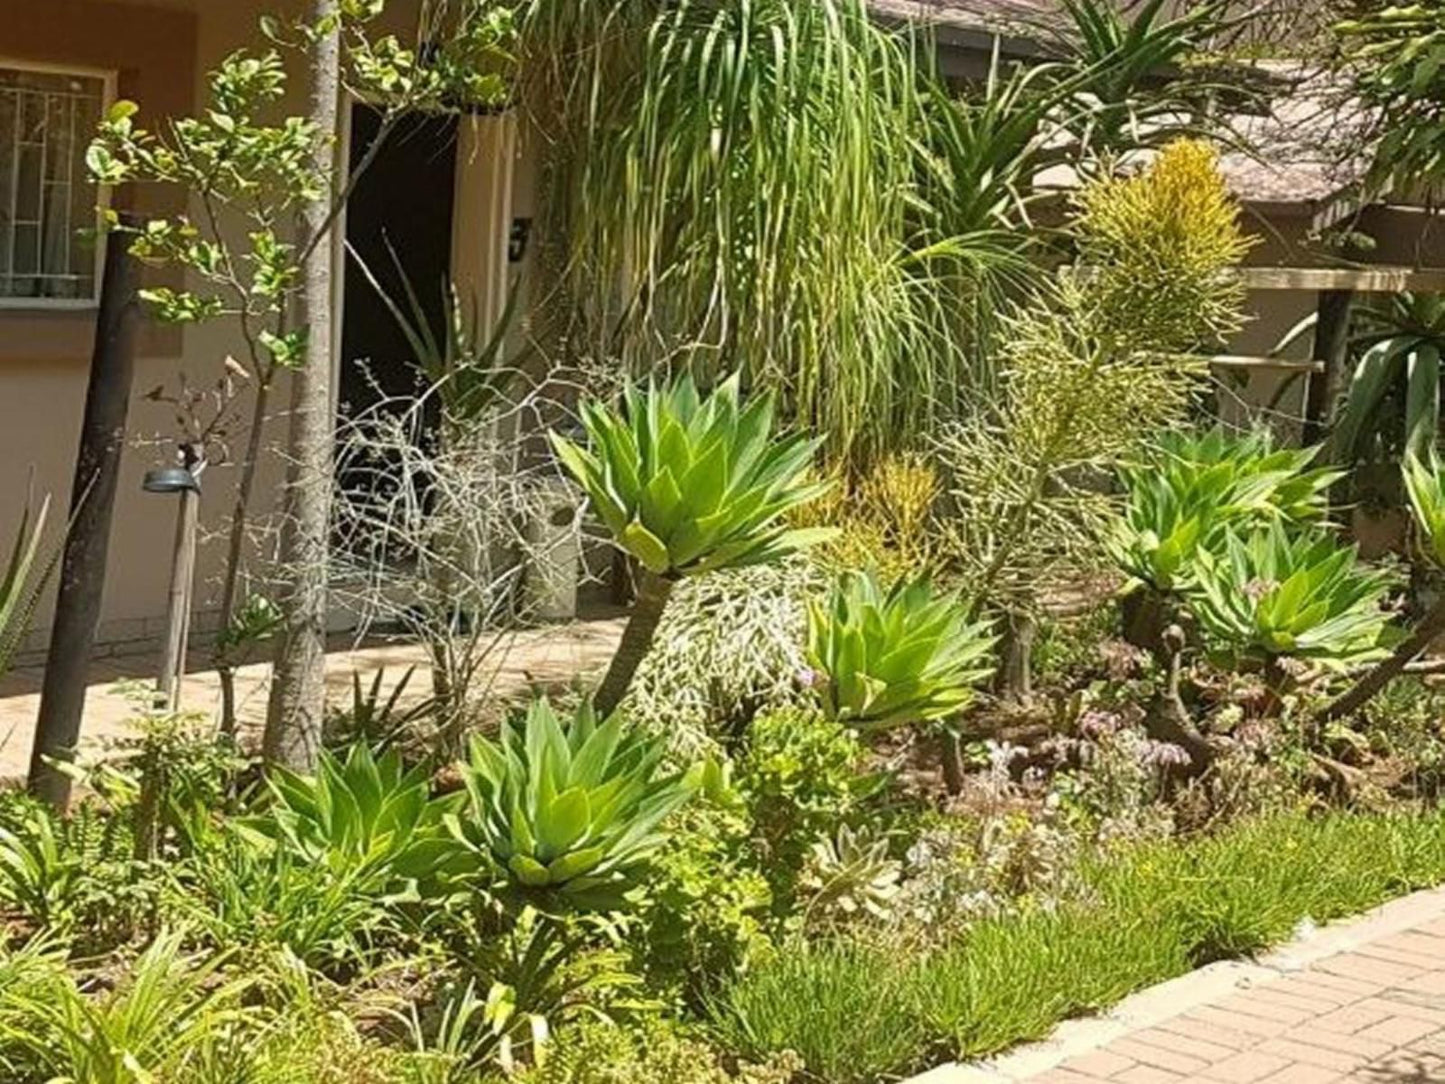 Country Blue Luxury Guest House Polokwane Ext 4 Polokwane Pietersburg Limpopo Province South Africa House, Building, Architecture, Palm Tree, Plant, Nature, Wood, Garden